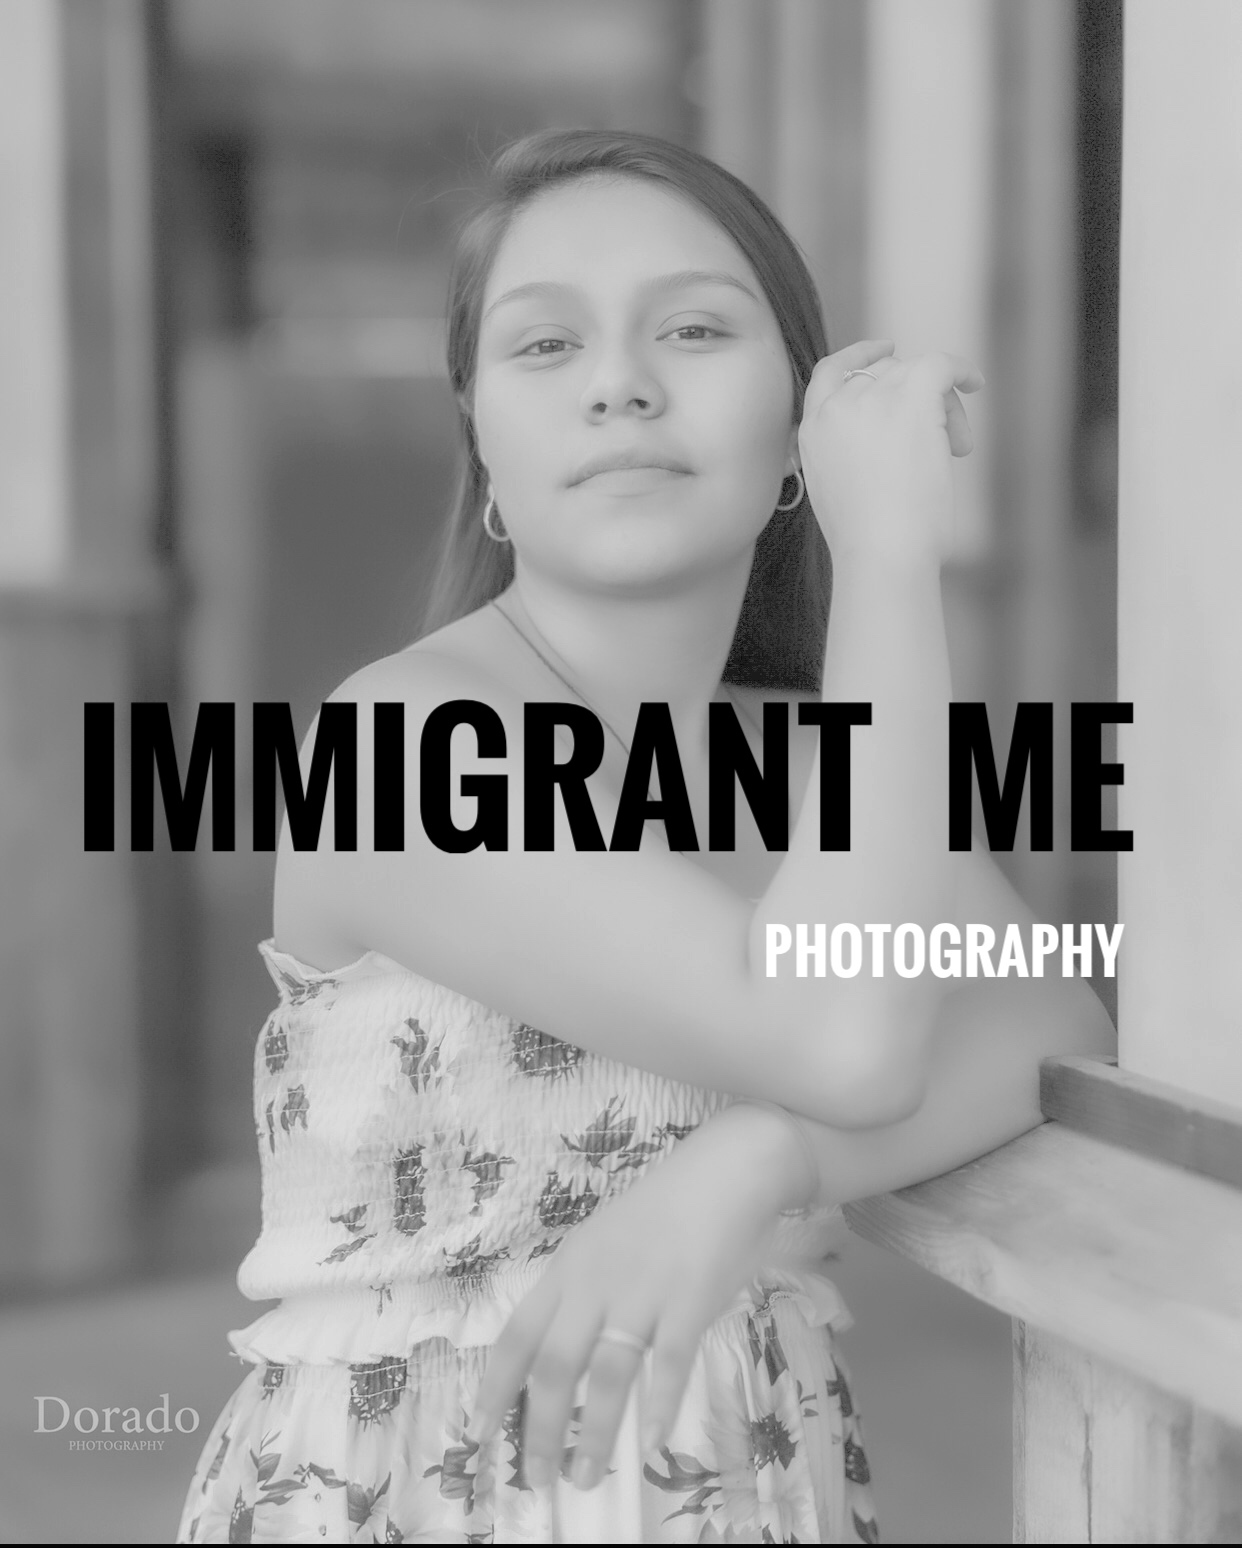 A photo of a woman posed and glancing off in the distance from the immigrant me exhibit